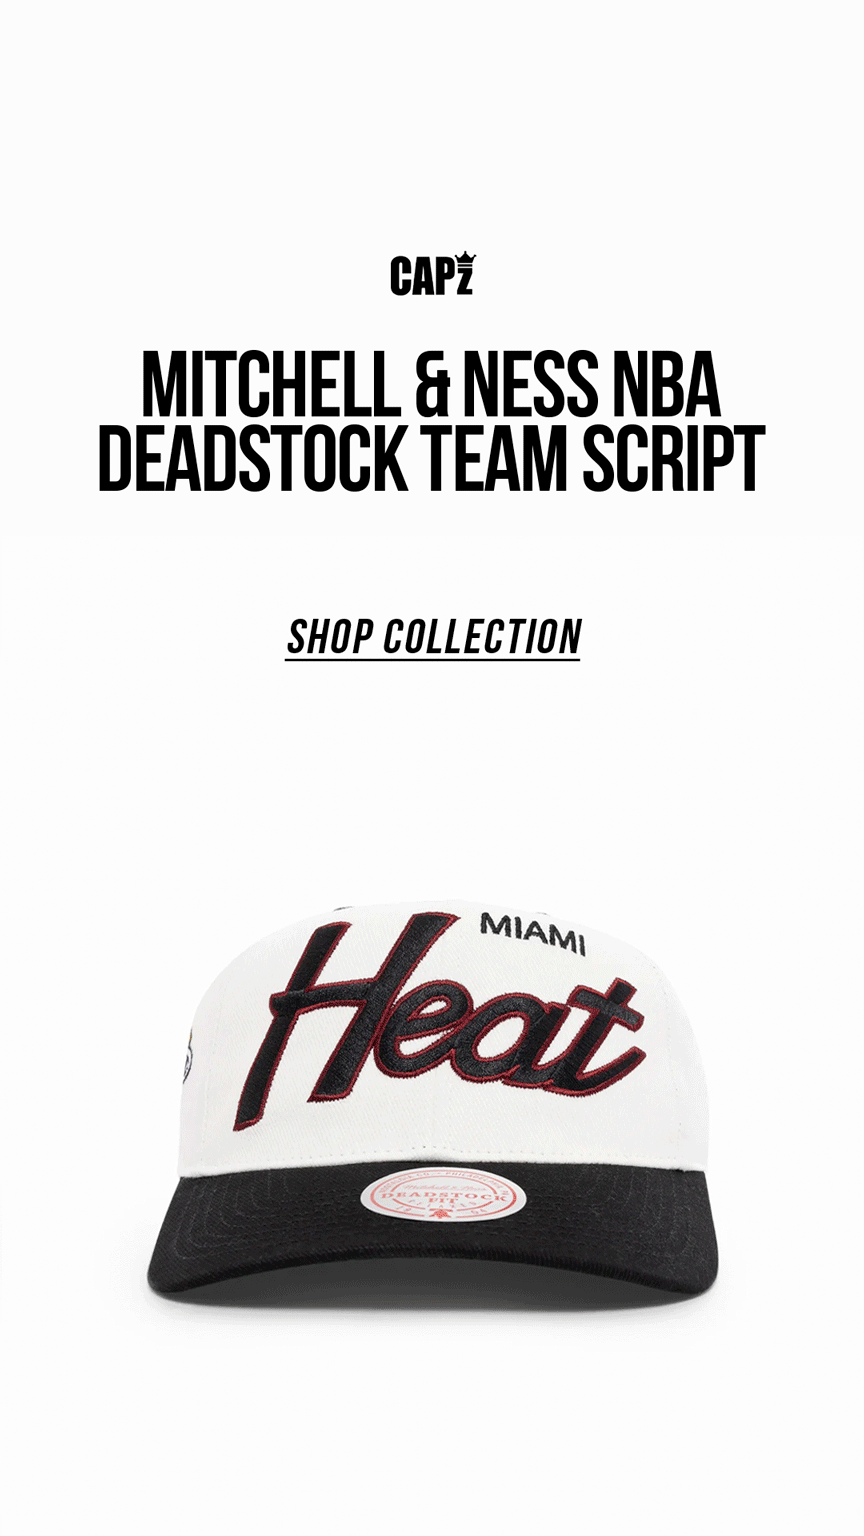 🔥Introducing the Ultimate Mitchell & Ness Snapbacks 🔥 - CapZ